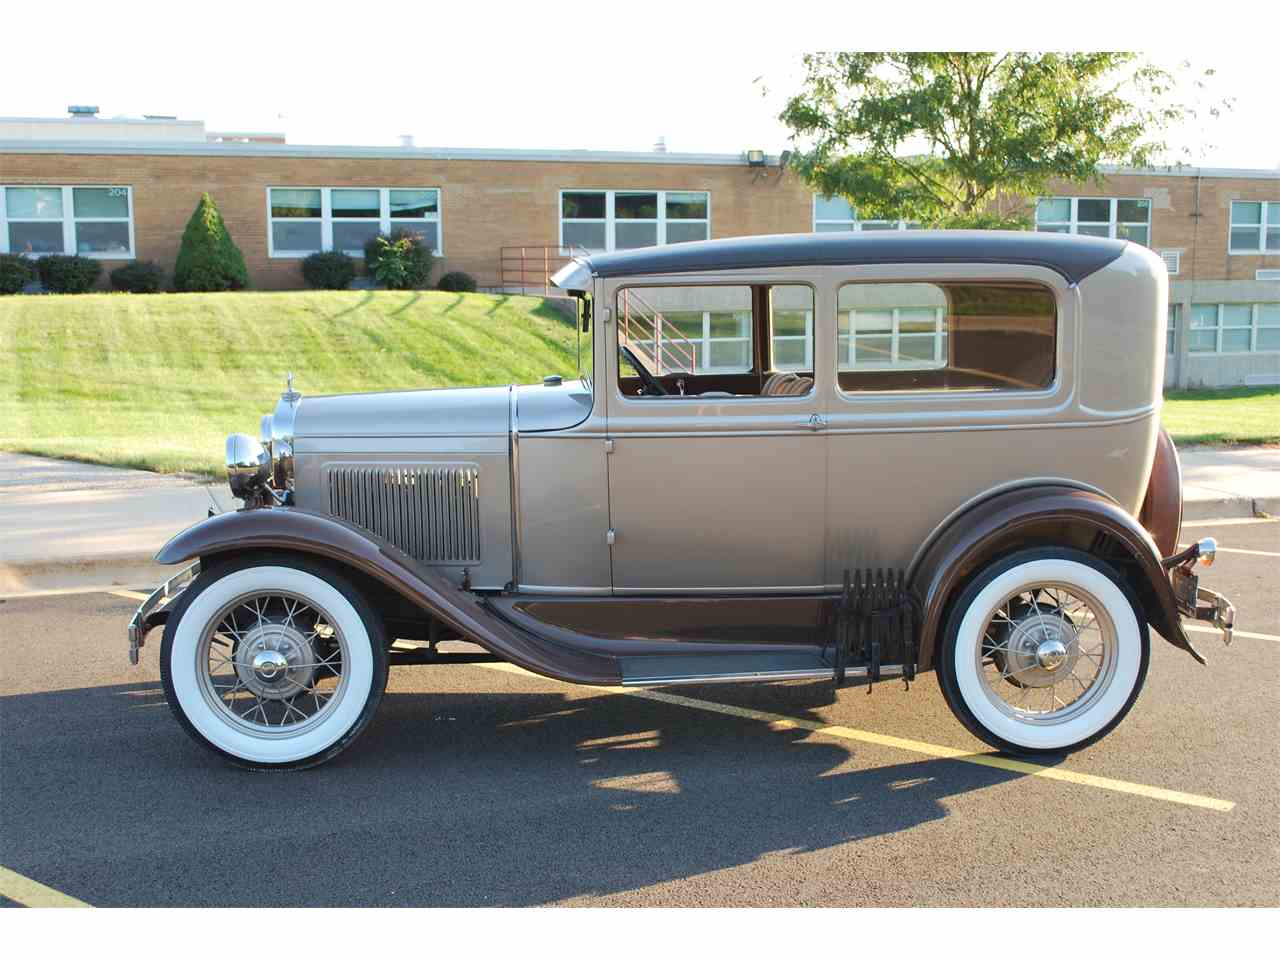 1930 Ford Model A For Sale On Classiccars 80 Available within Classic Car 1930